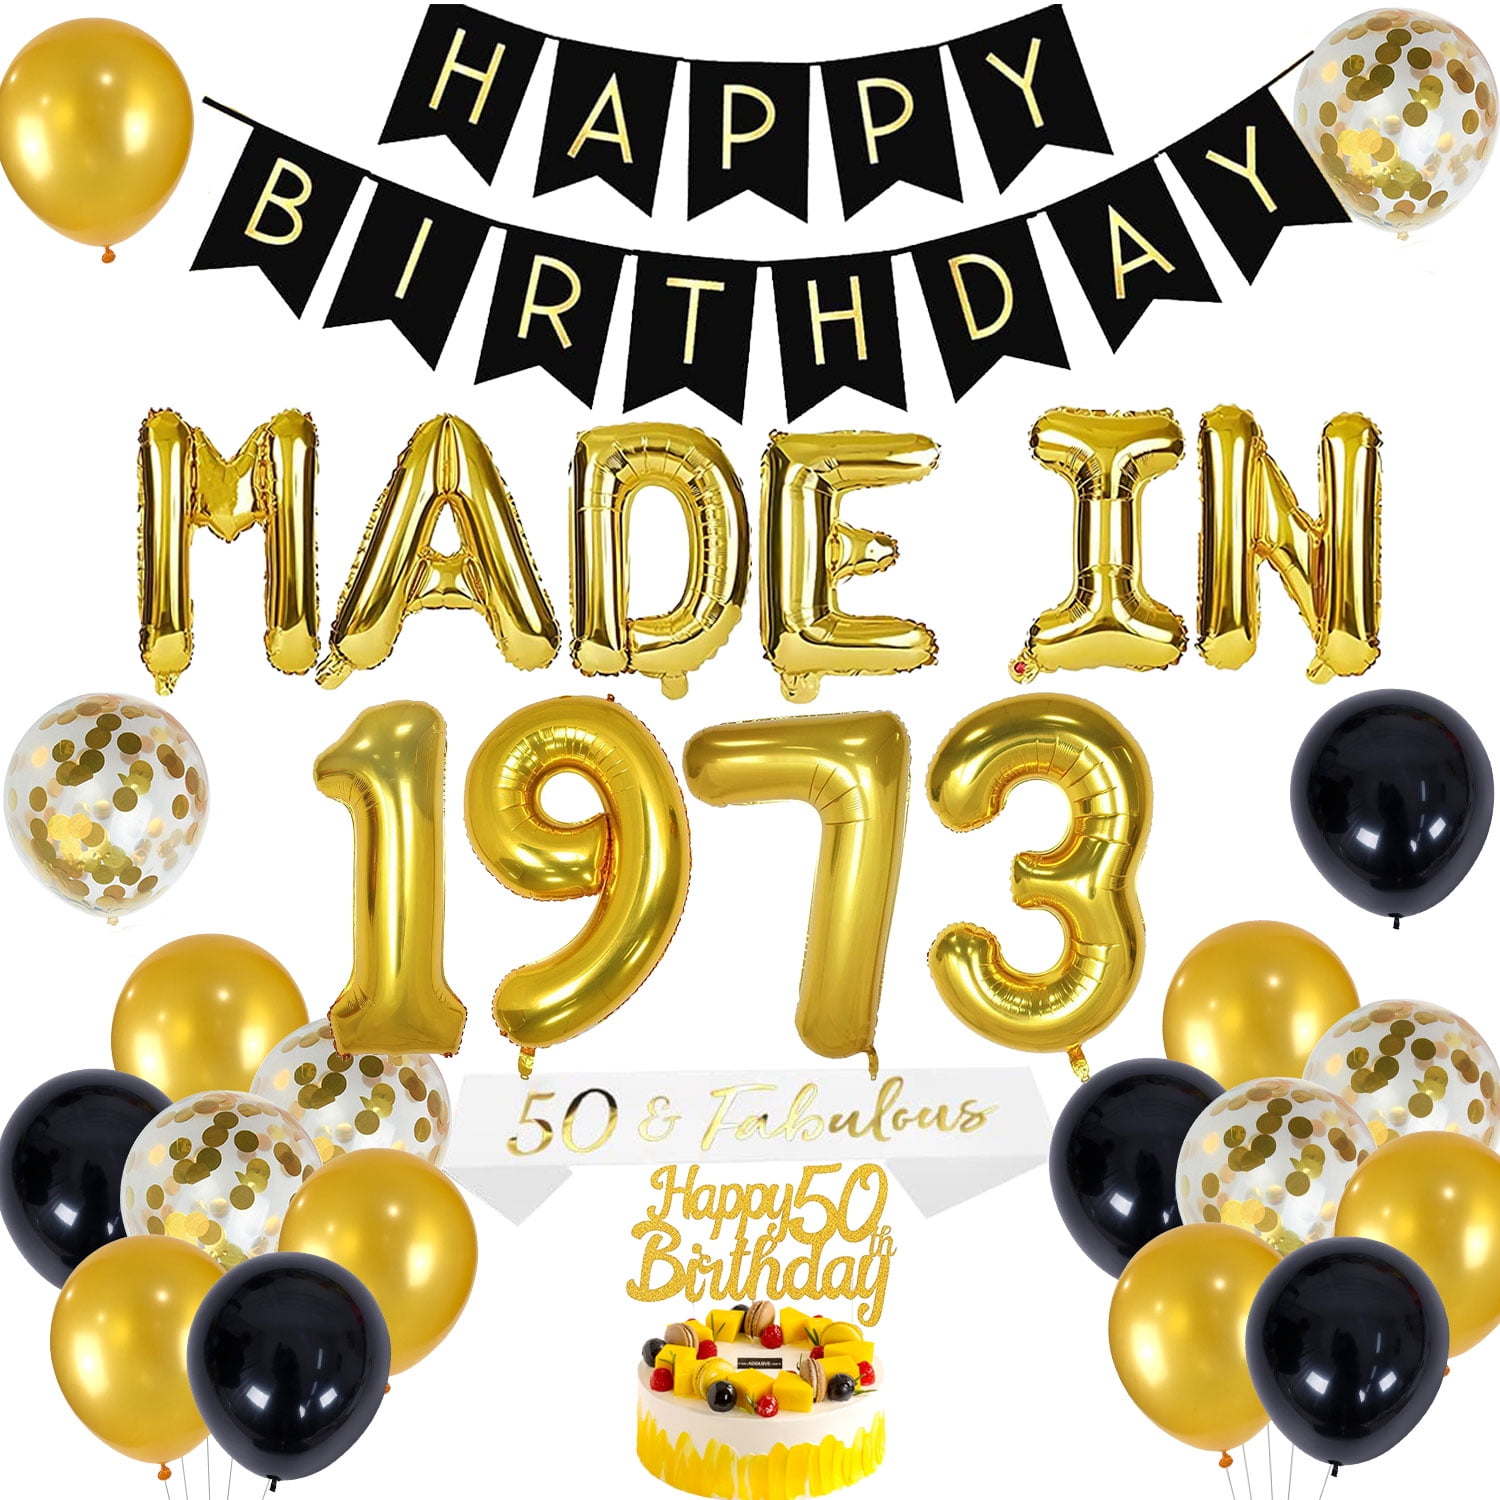  BEISHIDA 32pcs 1974 50th Birthday Balloons Gold and Black Party  Decorations 12 Inch Latex and Confetti Balloon Printed with Happy Birthday  for Women Men Birthday Party Decorations : Toys & Games